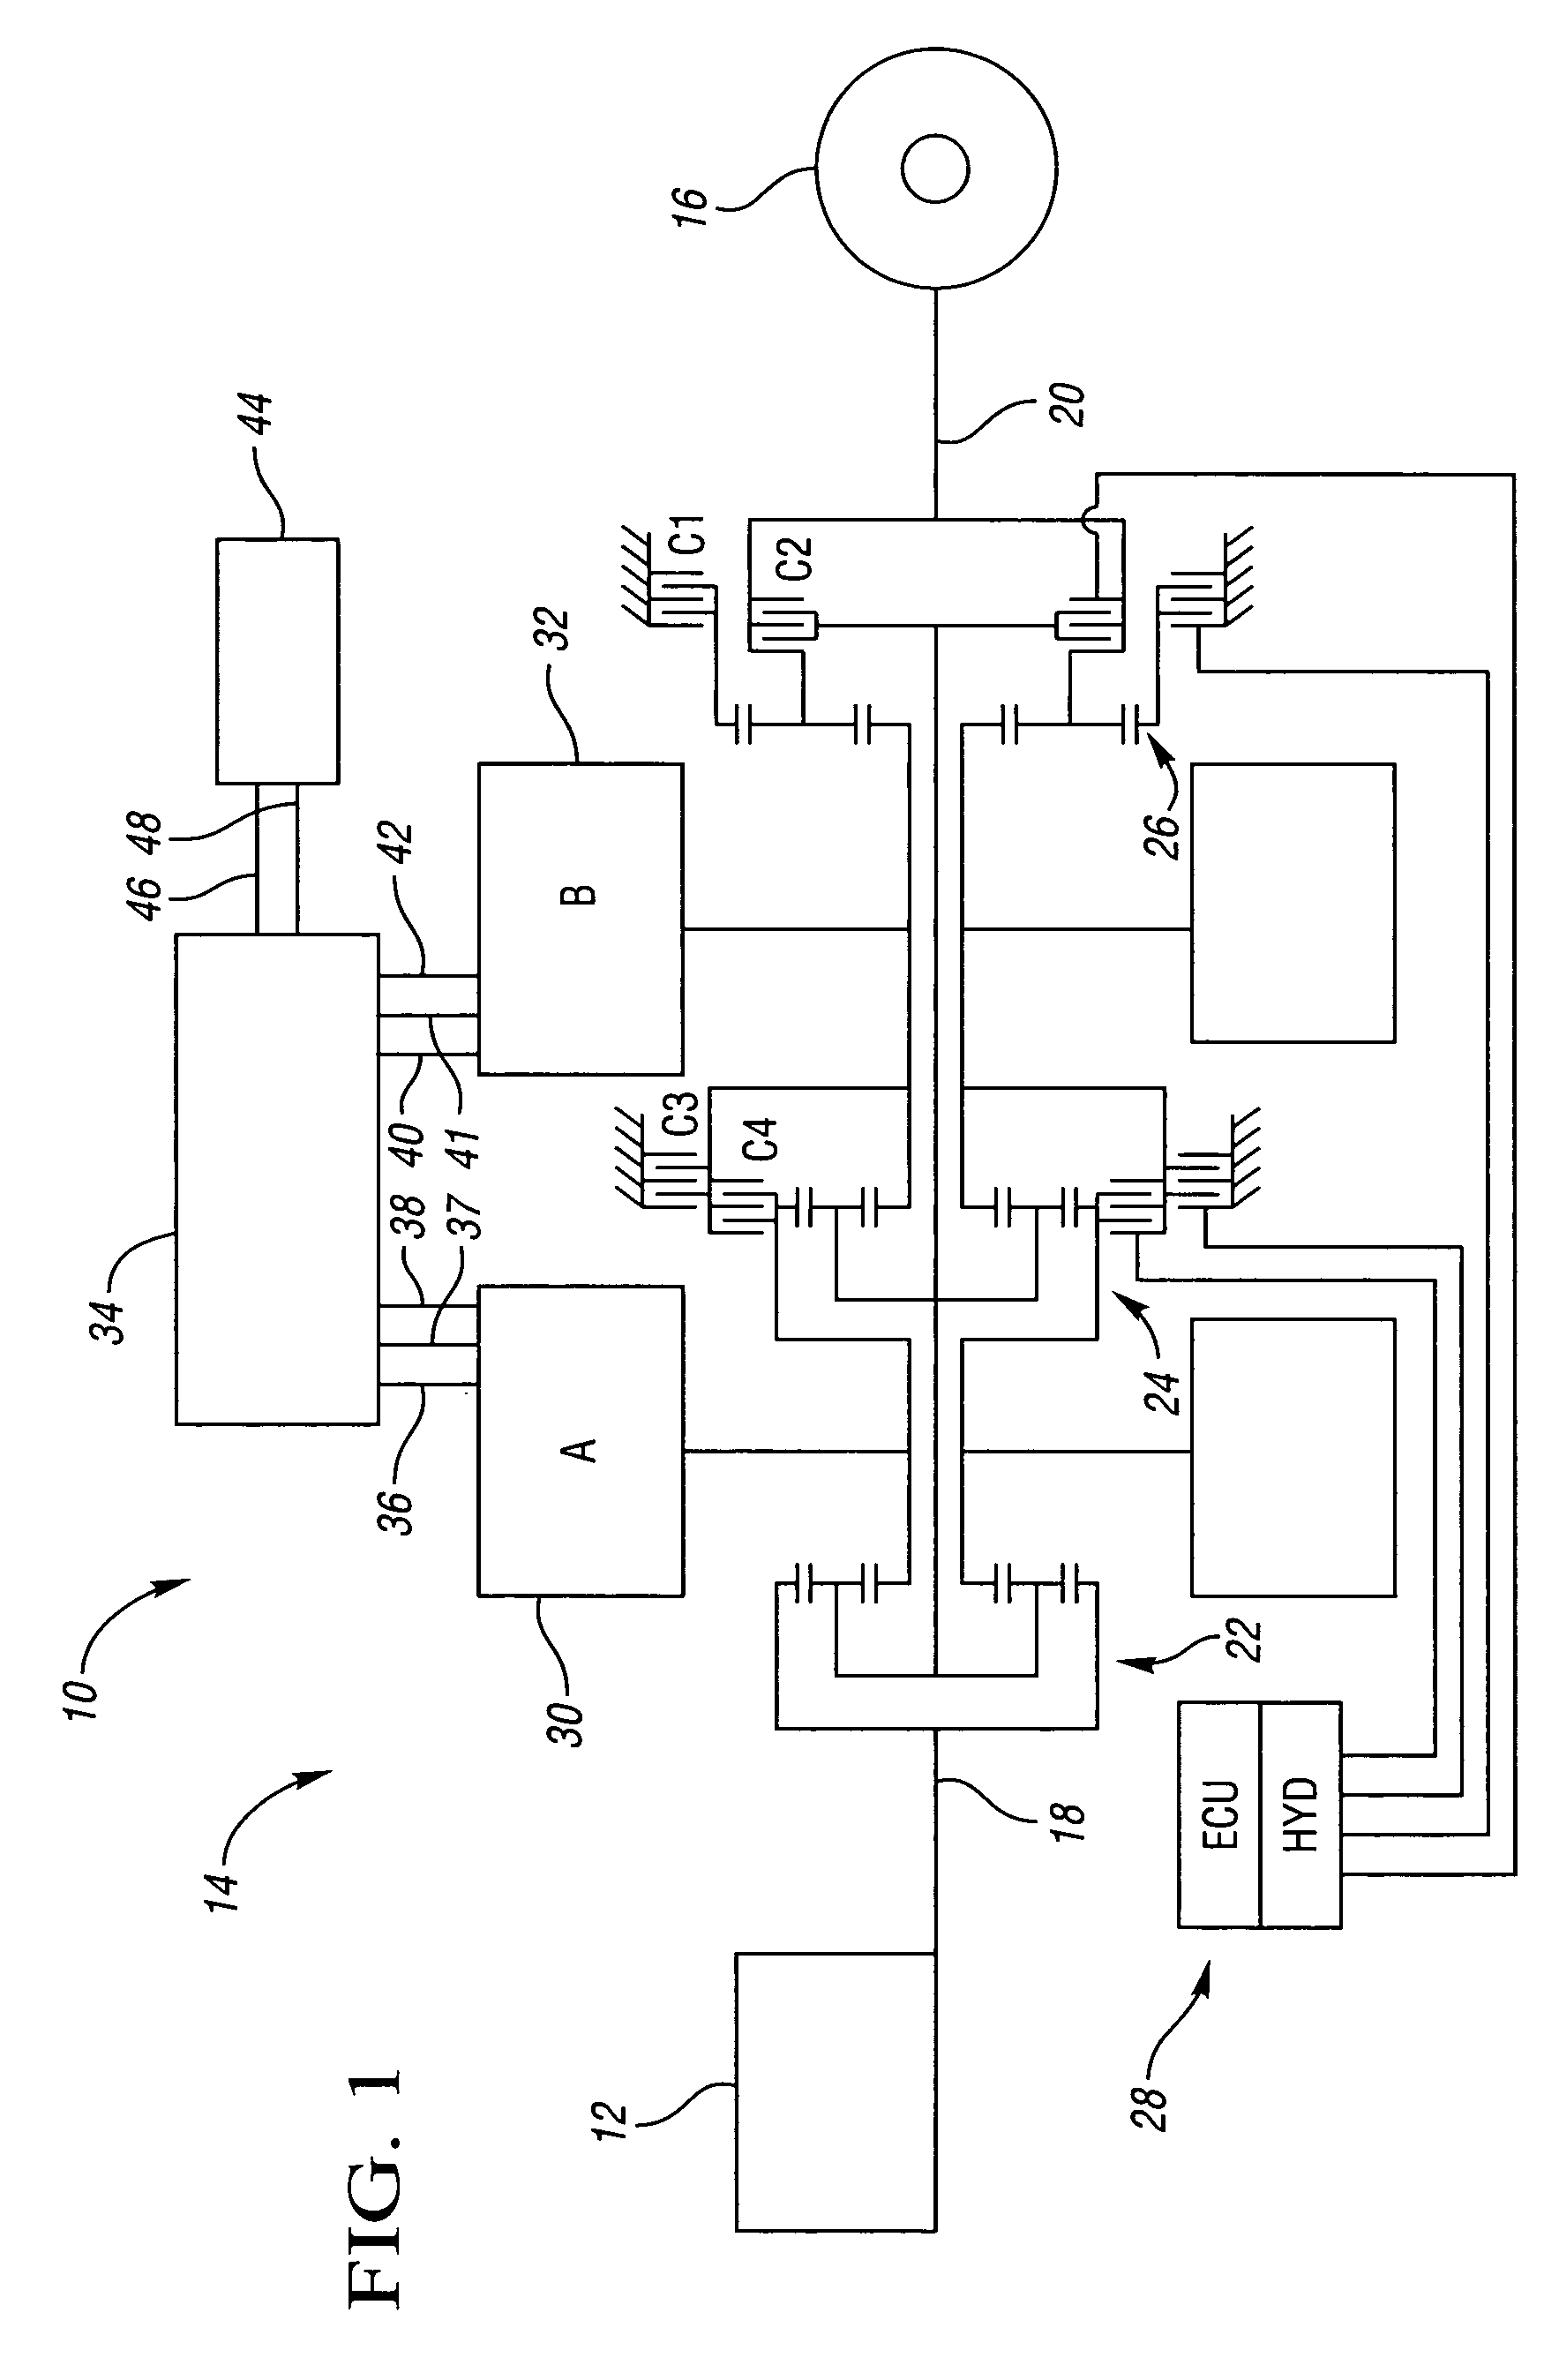 Multiplexed control system and method for an electrically variable hybrid transmission